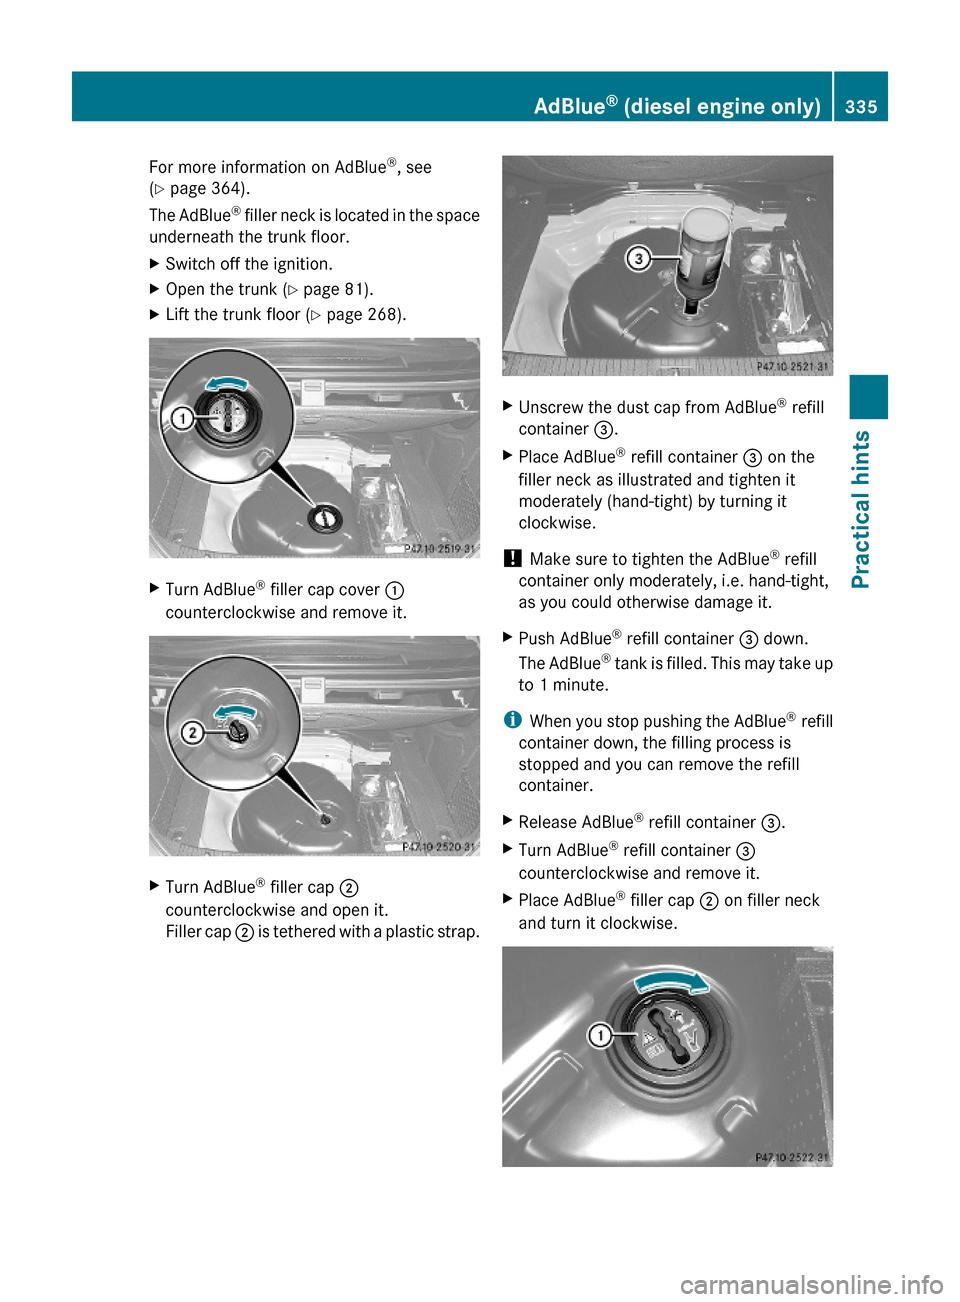 MERCEDES-BENZ E350 2010 W212 Owners Manual For more information on AdBlue®, see
(Y page 364).
The AdBlue® filler neck is located in the space
underneath the trunk floor.
XSwitch off the ignition.XOpen the trunk (Y page 81).XLift the trunk fl